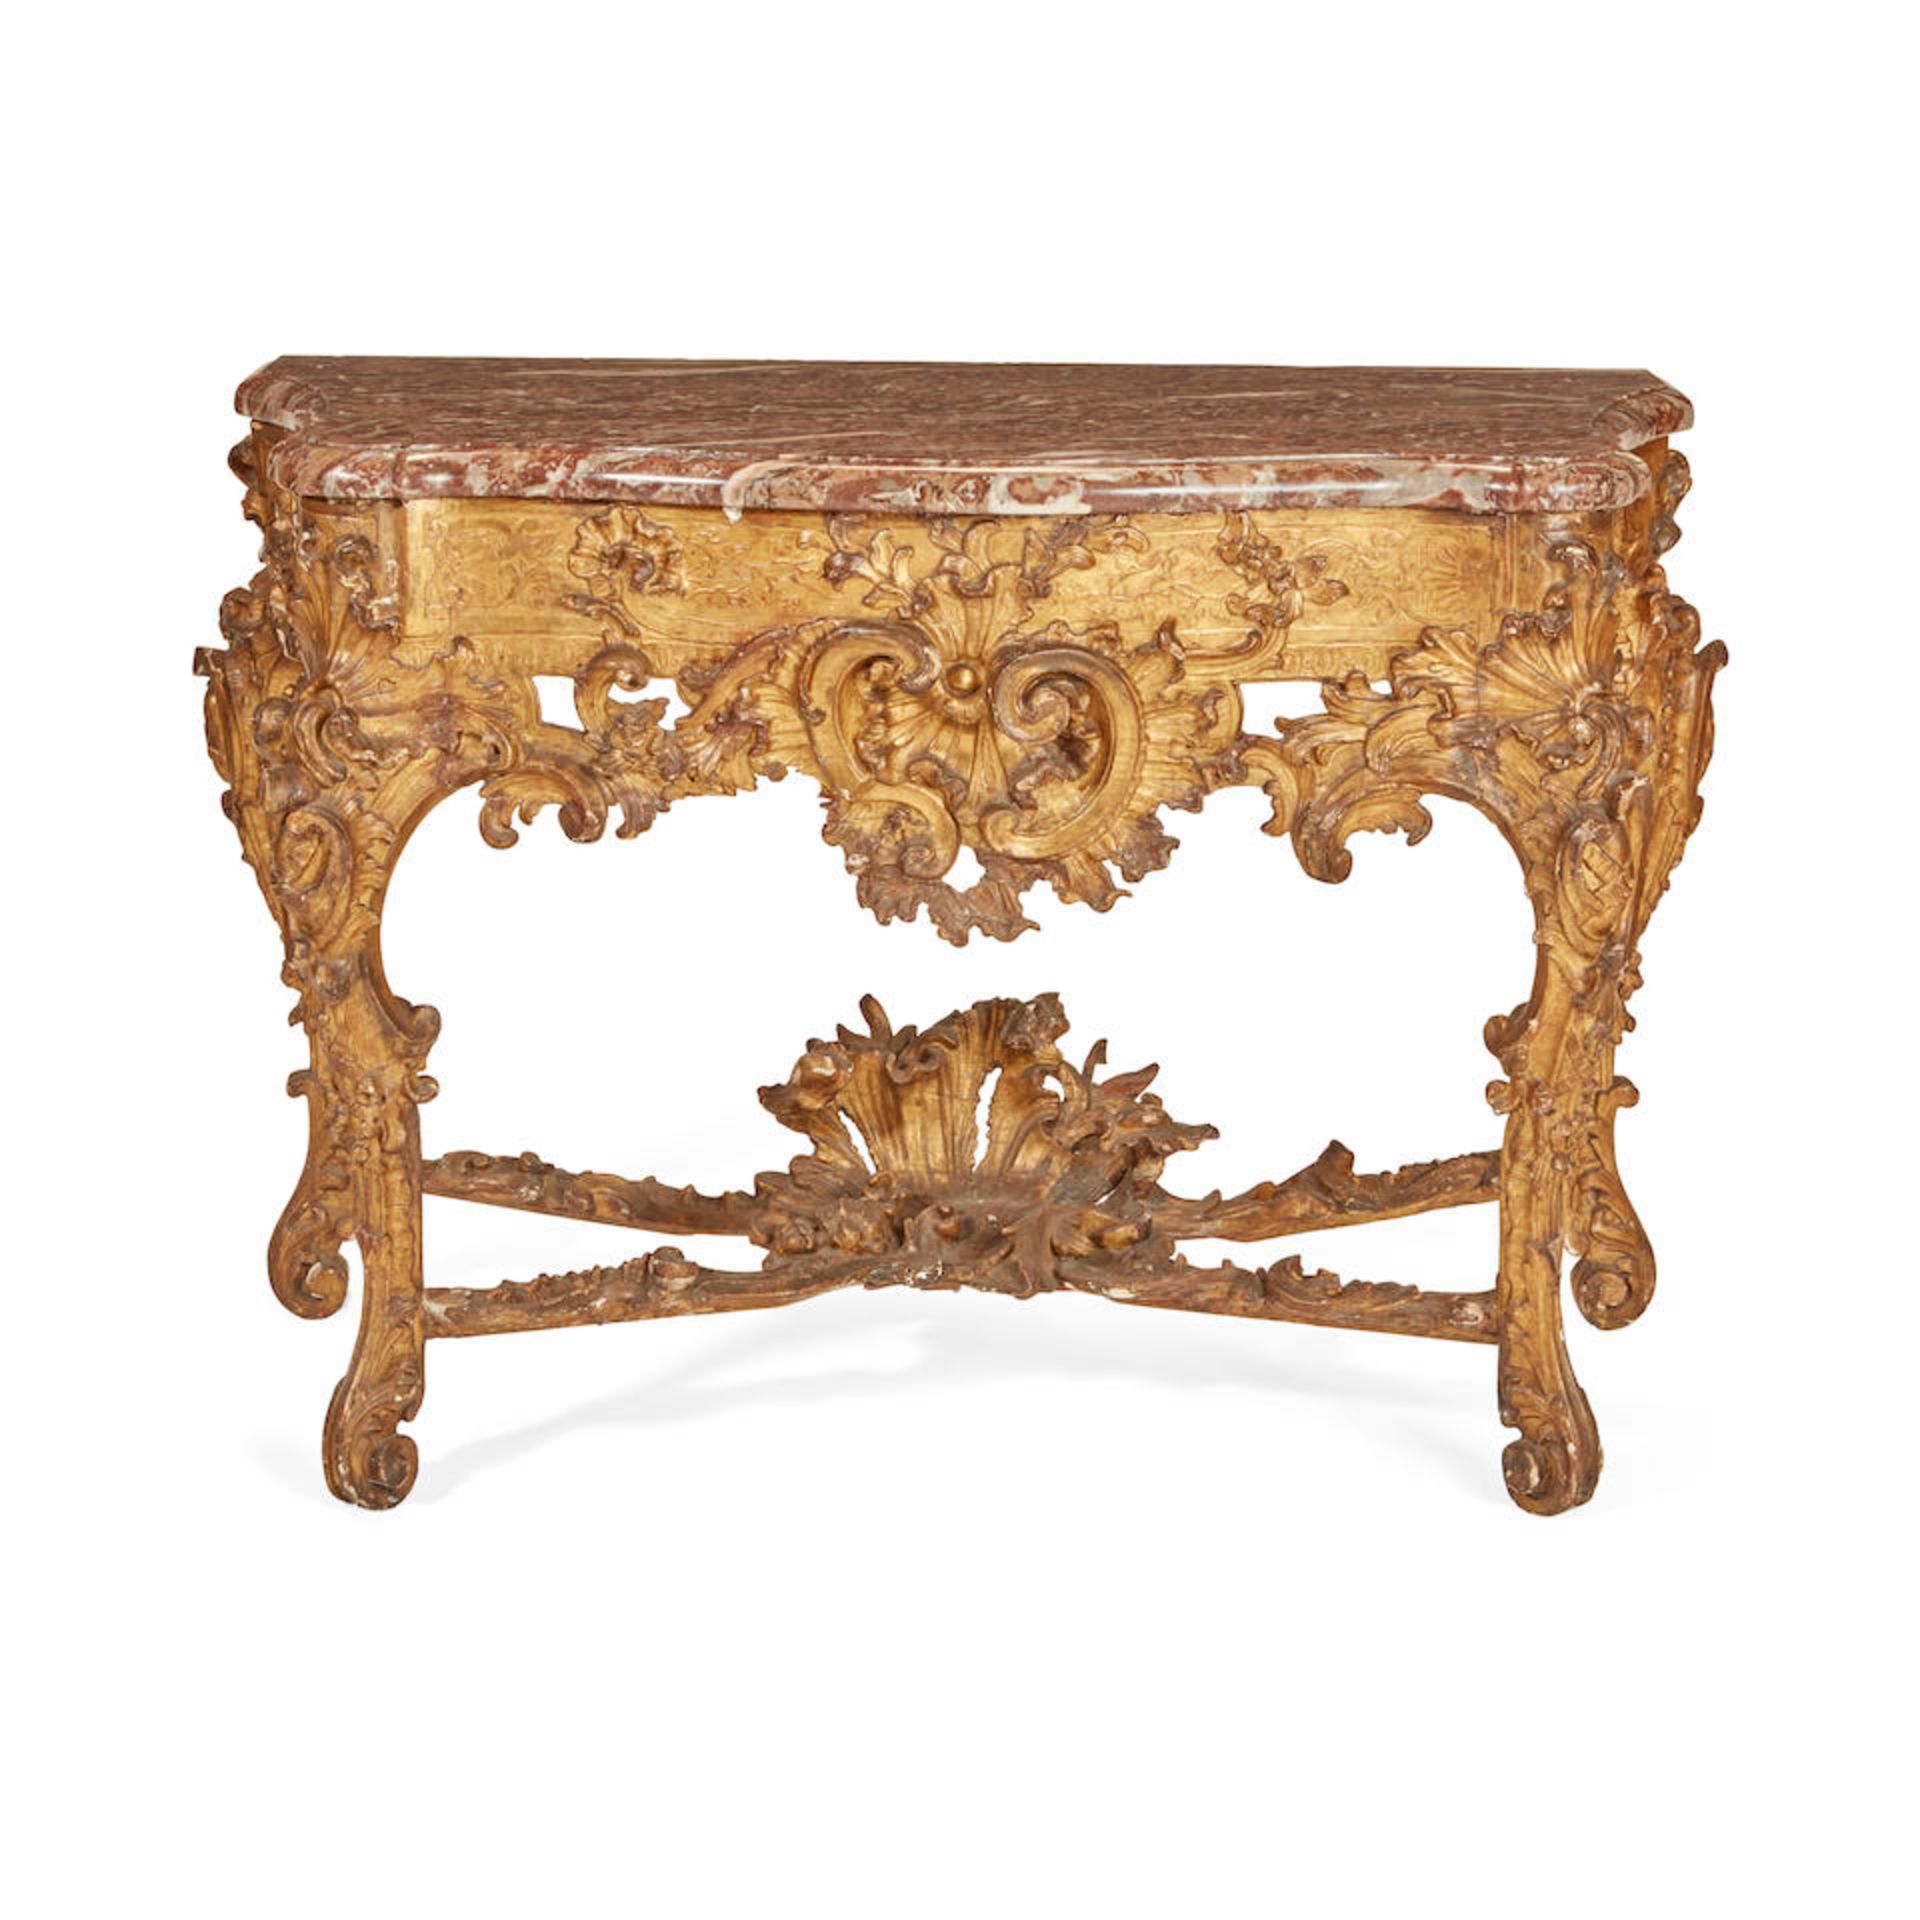 A GERMAN ROCOCO MARBLE TOP CARVED GILTWOOD CONSOLE TABLEMid-18th century - Image 2 of 2